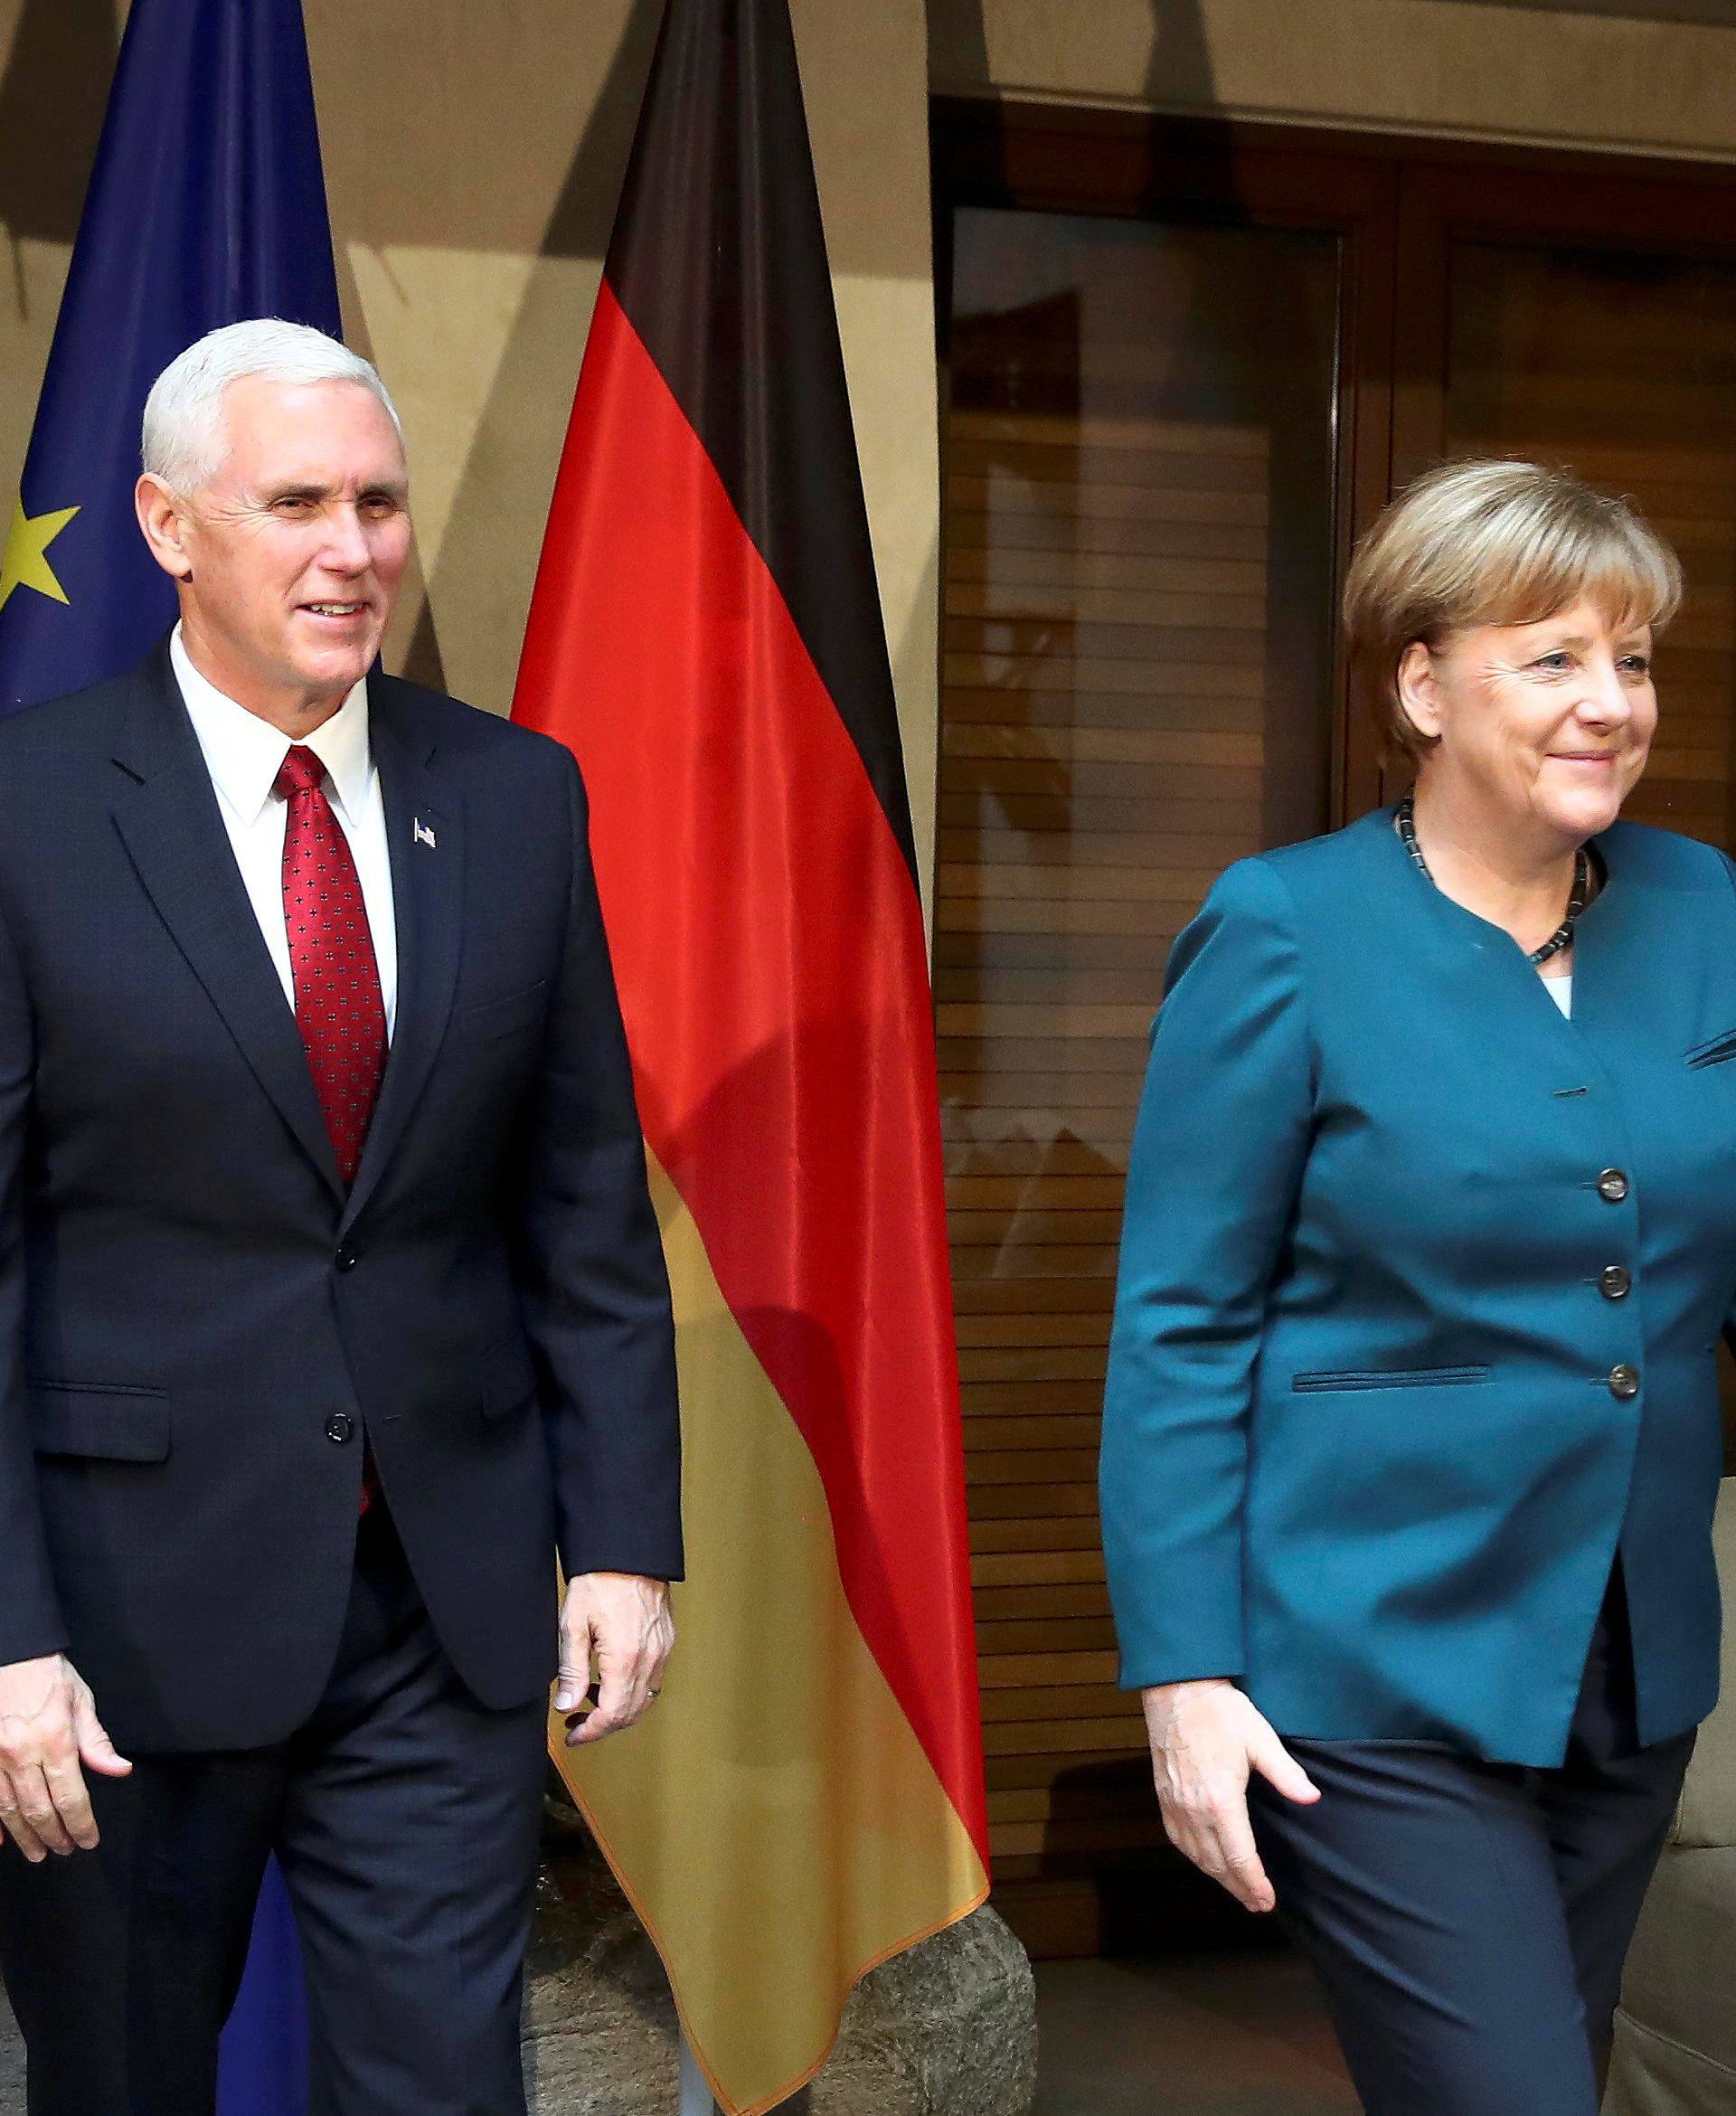 German Chancellor Merkel walks with U.S. Vice President Pence before their meeting at the 53rd Munich Security Conference in Munich